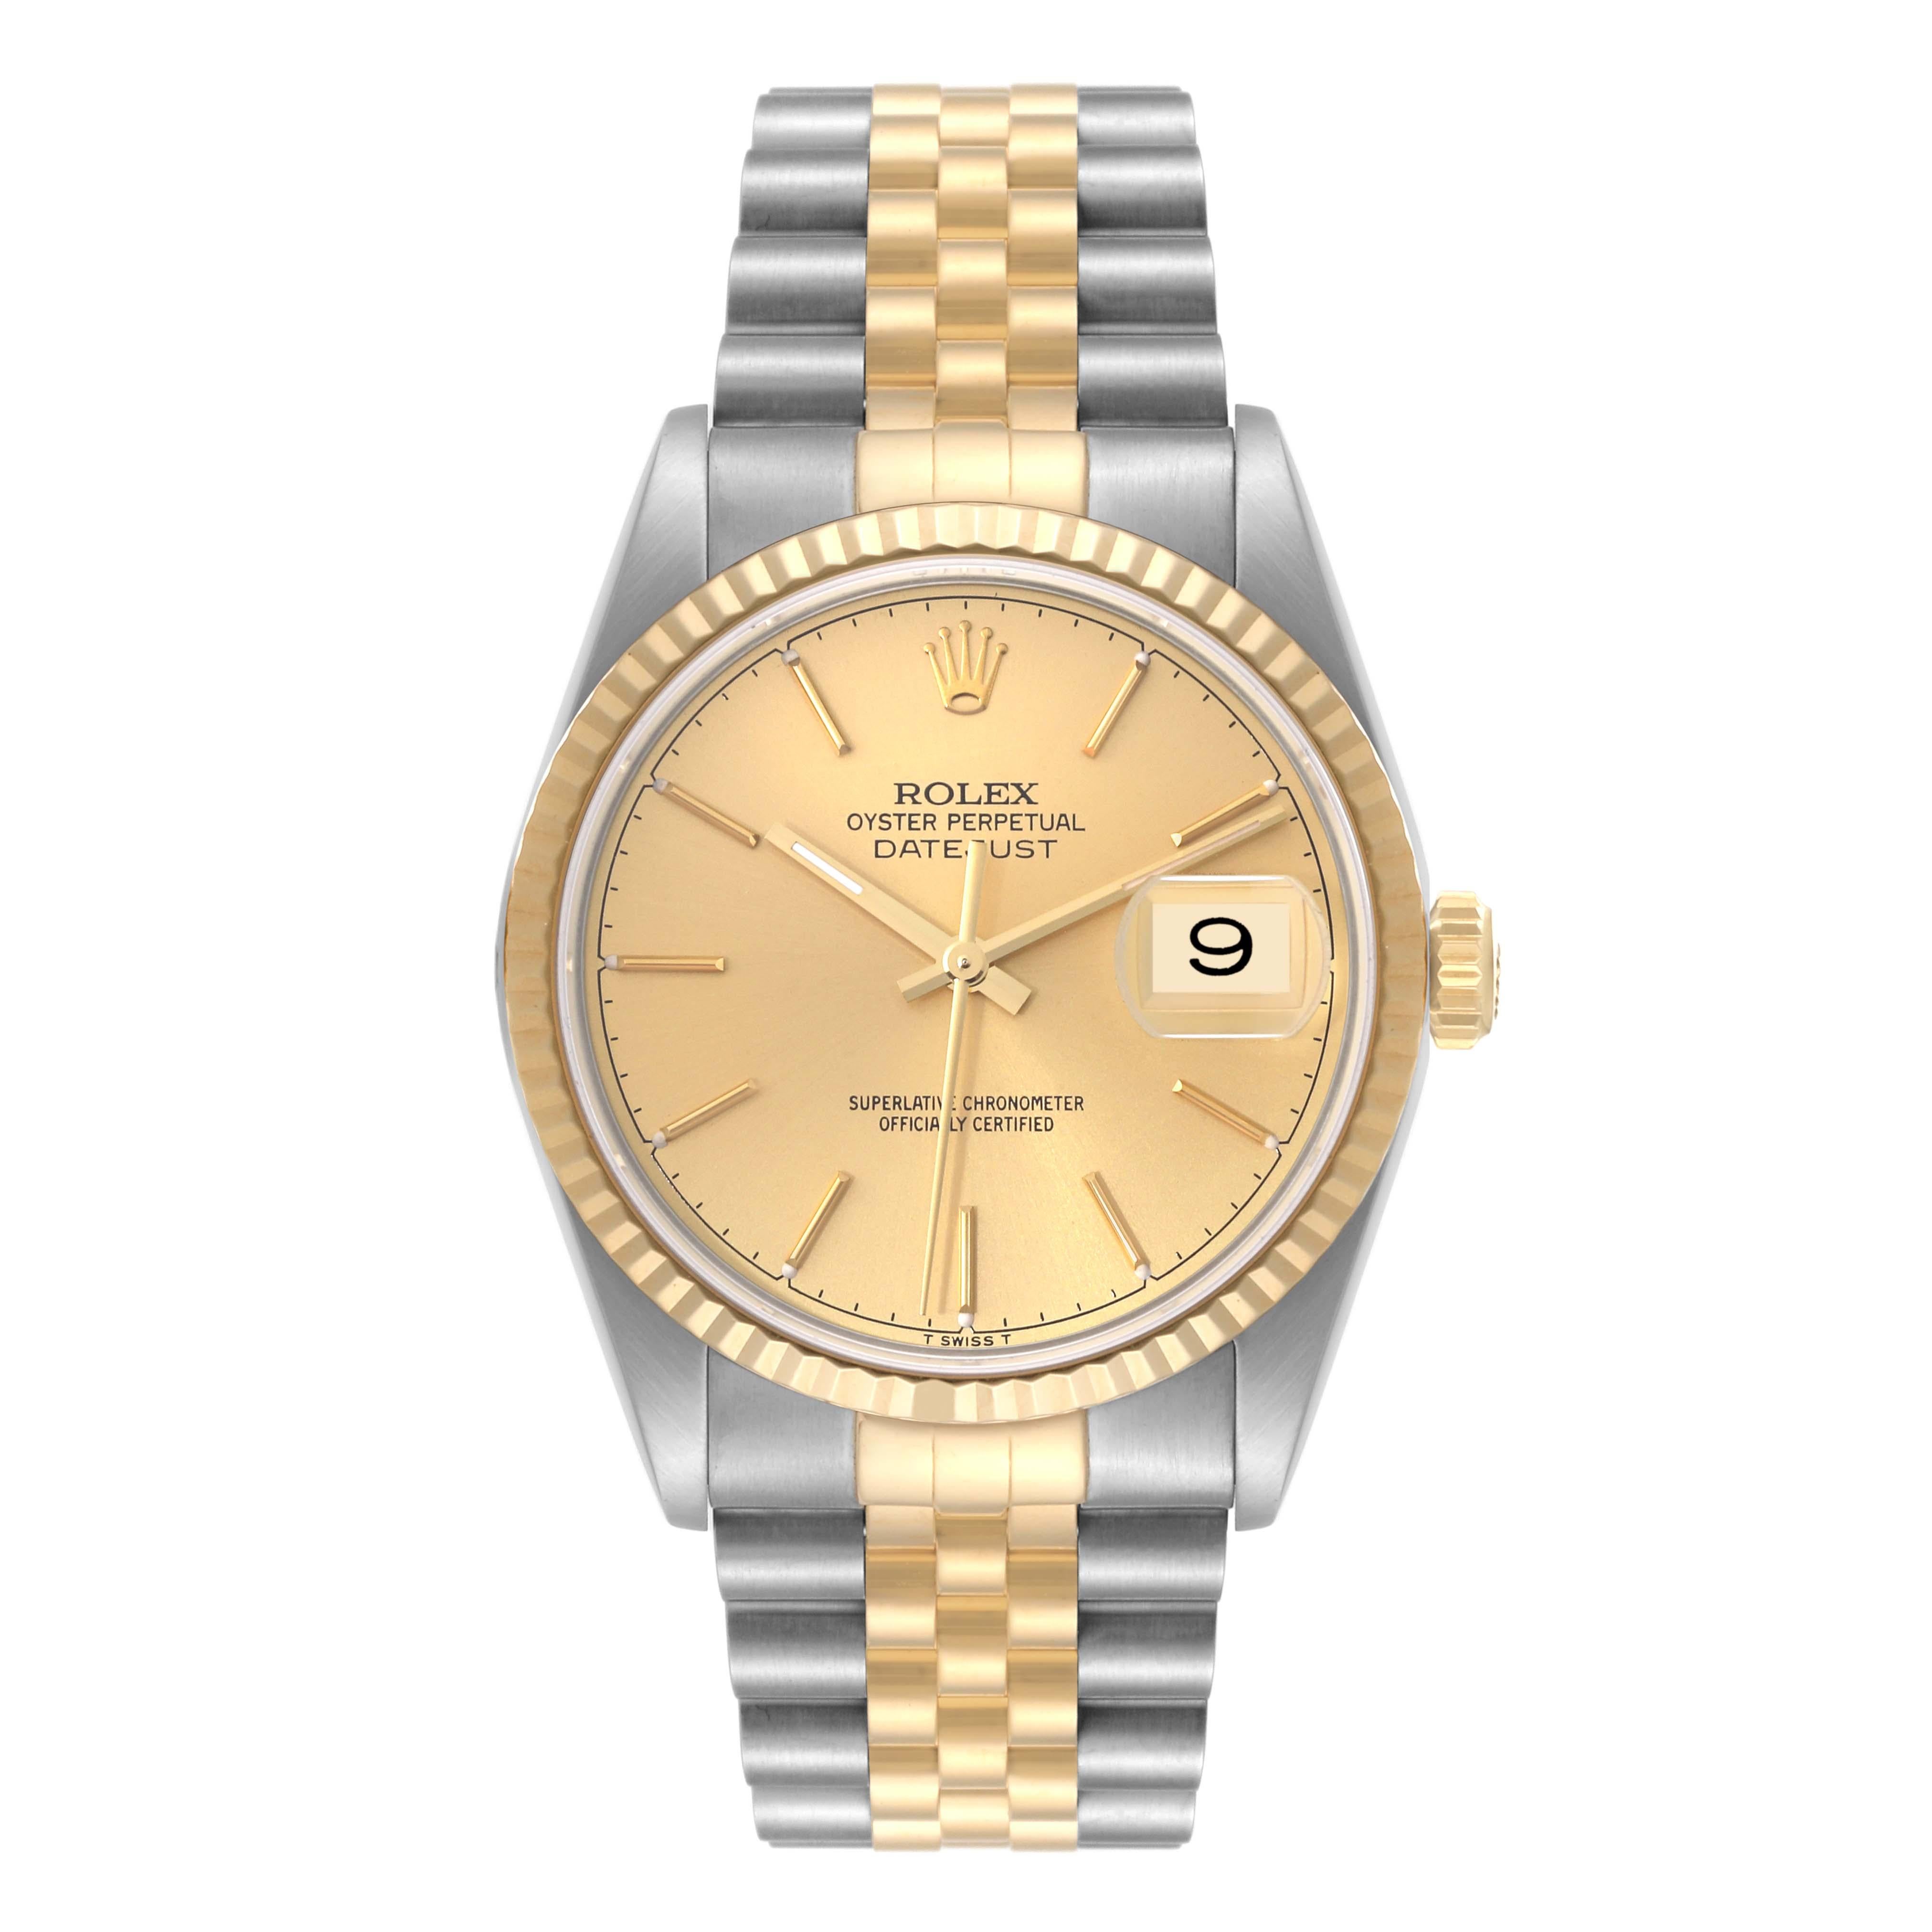 Rolex Datejust Steel Yellow Gold Champagne Dial Mens Watch 16233. Officially certified chronometer automatic self-winding movement. Stainless steel case 36 mm in diameter.  Rolex logo on an 18K yellow gold crown. 18k yellow gold fluted bezel.